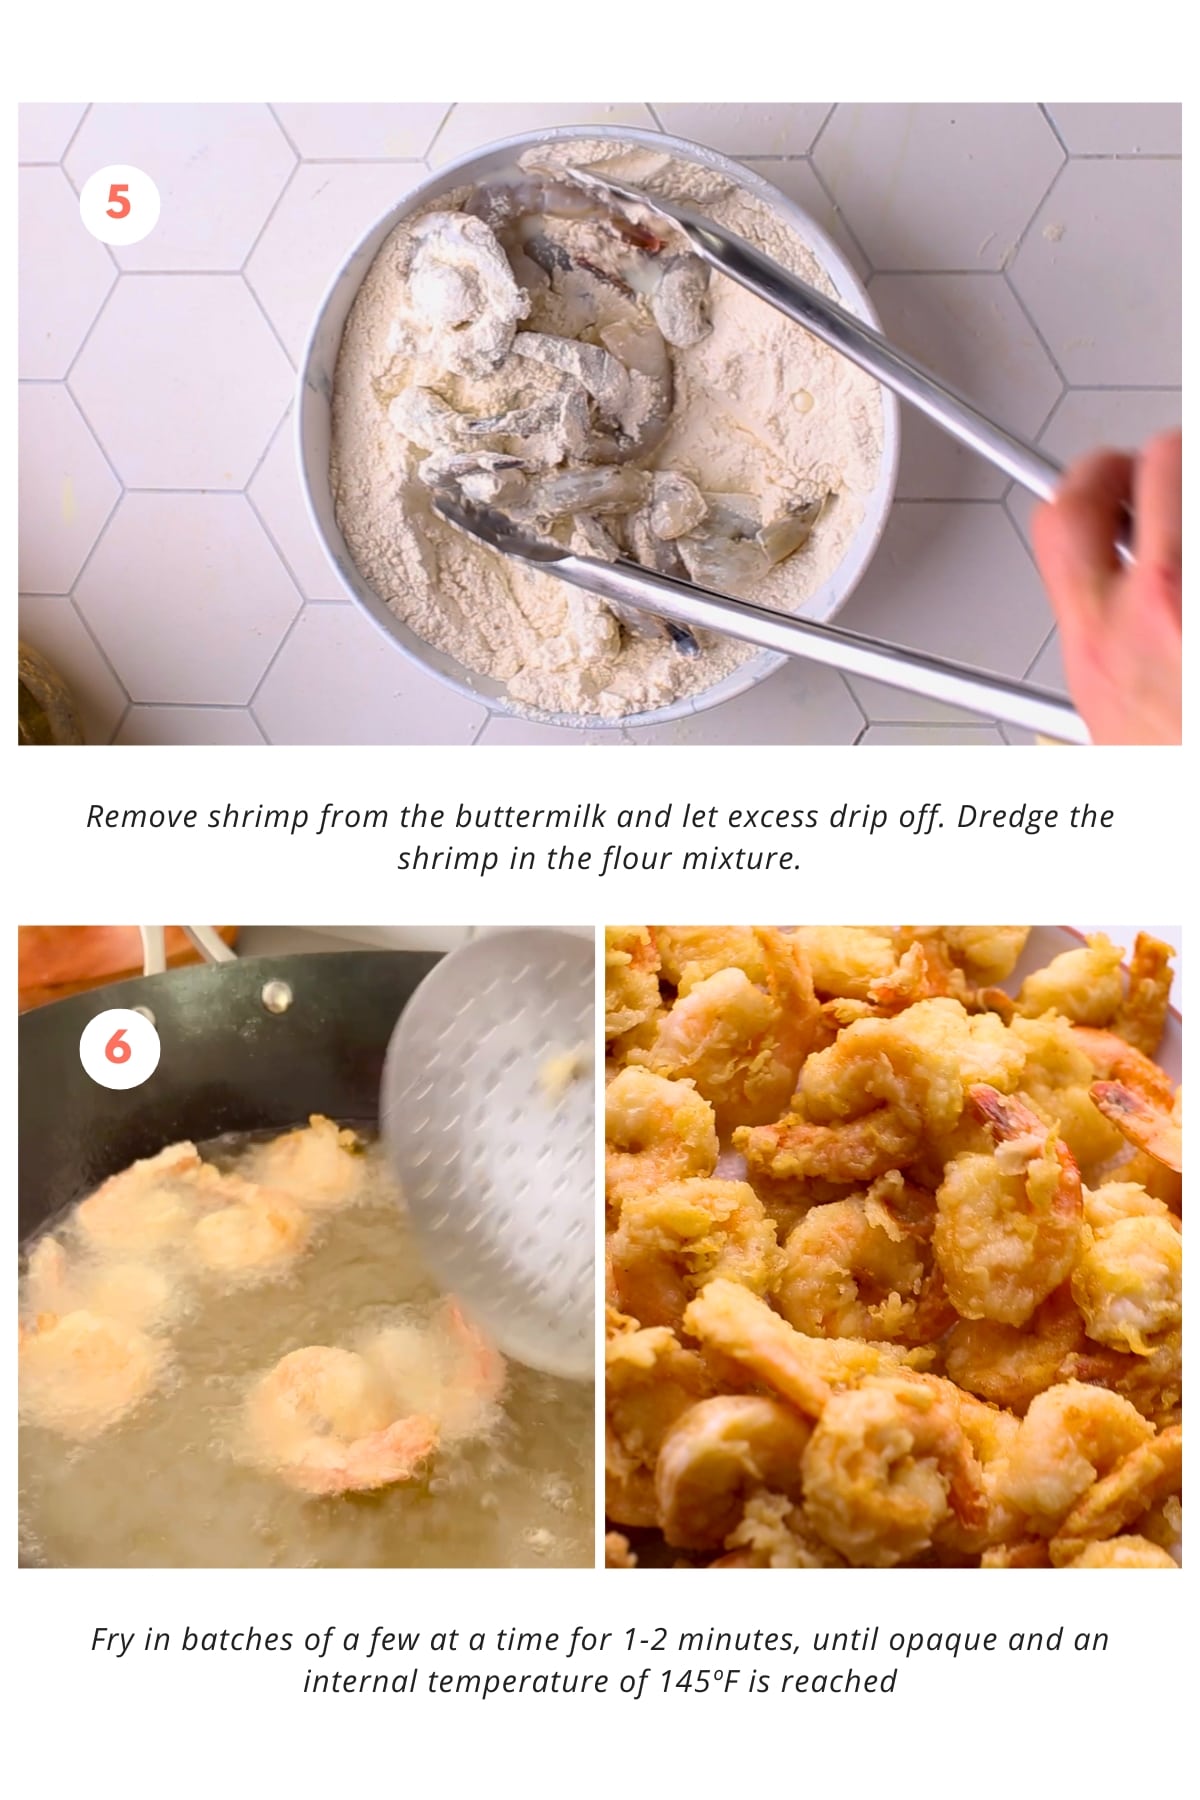 The shrimp are removed from the buttermilk and excess is allowed to drip off. Then, they are dredged in the flour mixture and fried in batches of a few at a time for 1-2 minutes until they are opaque and reach an internal temperature of 145ºF.